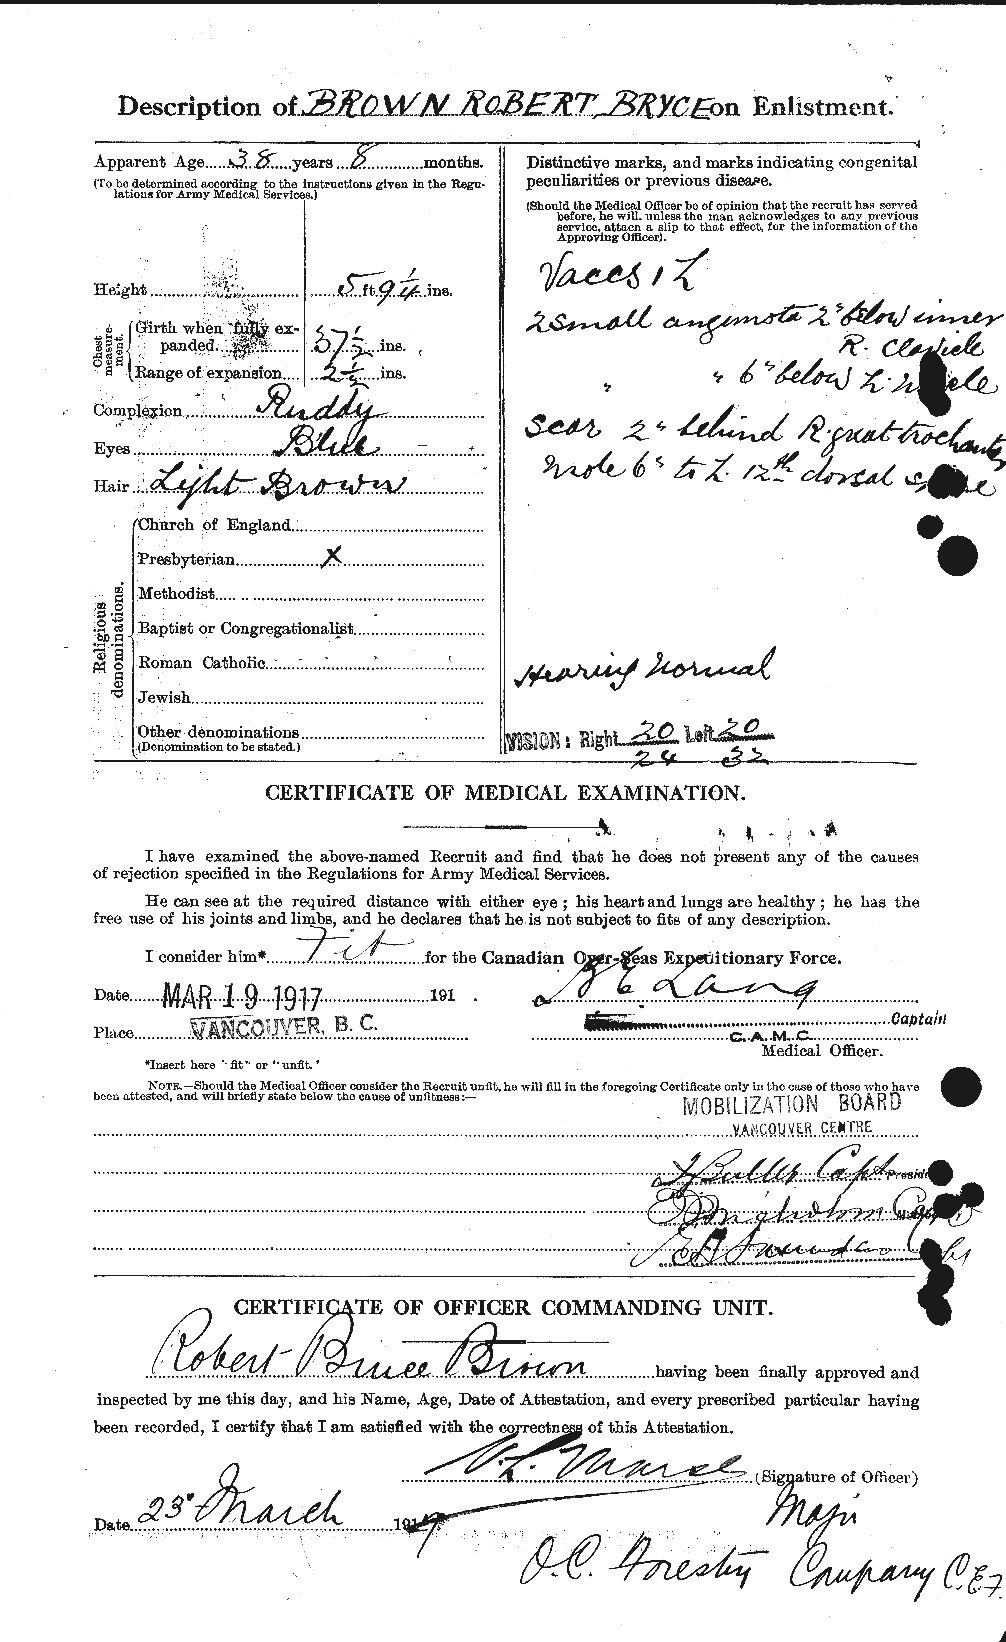 Personnel Records of the First World War - CEF 269901b